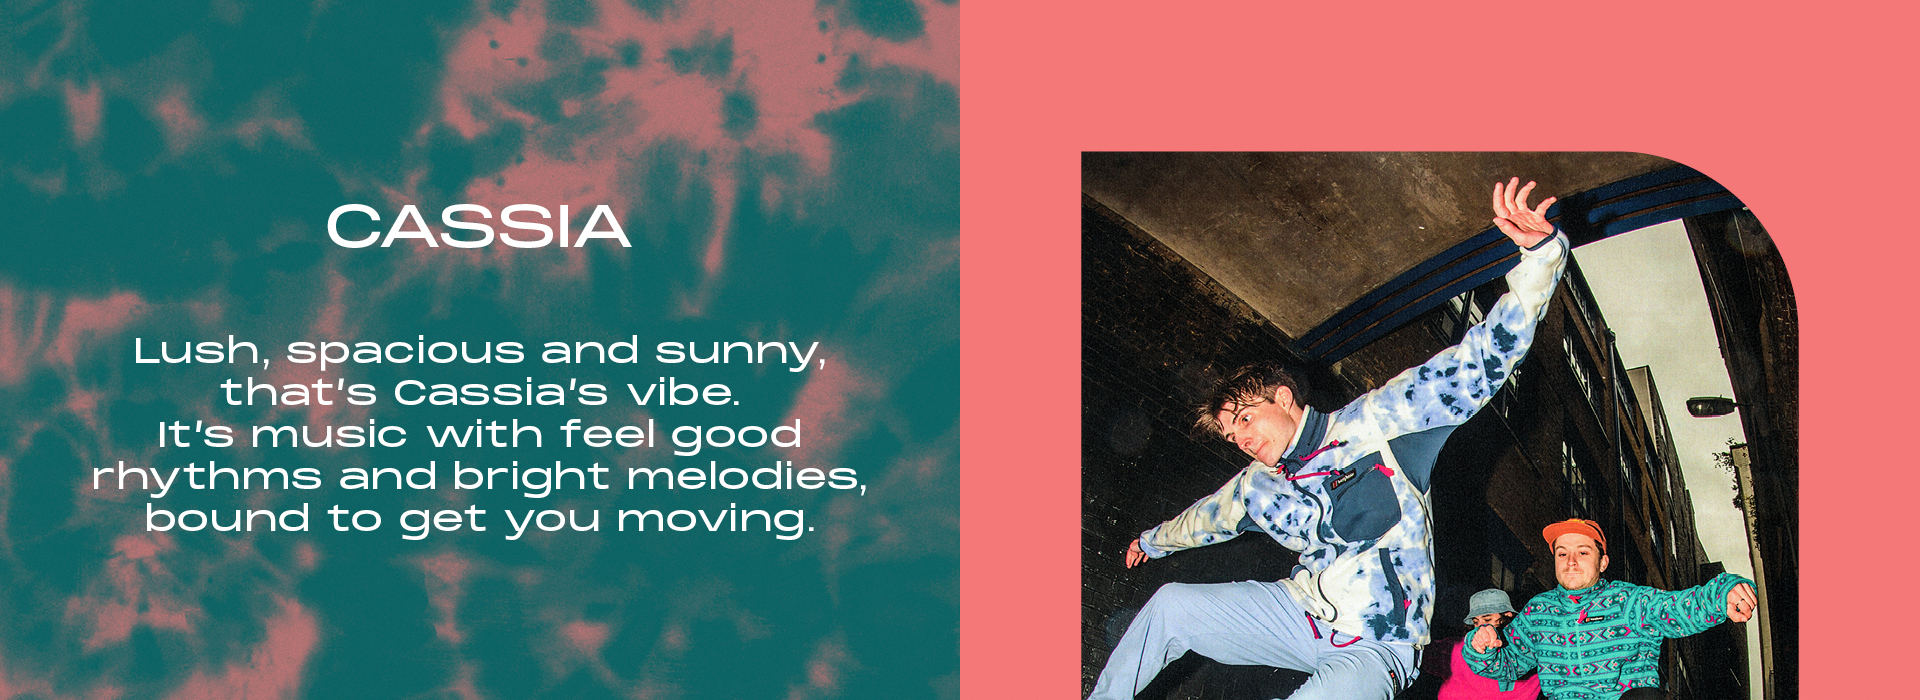 Cassia. Lush, spacious and sunny, that's Cassia's vibe. It's music with feel good rhythms and bright melodies, bound to get you moving.